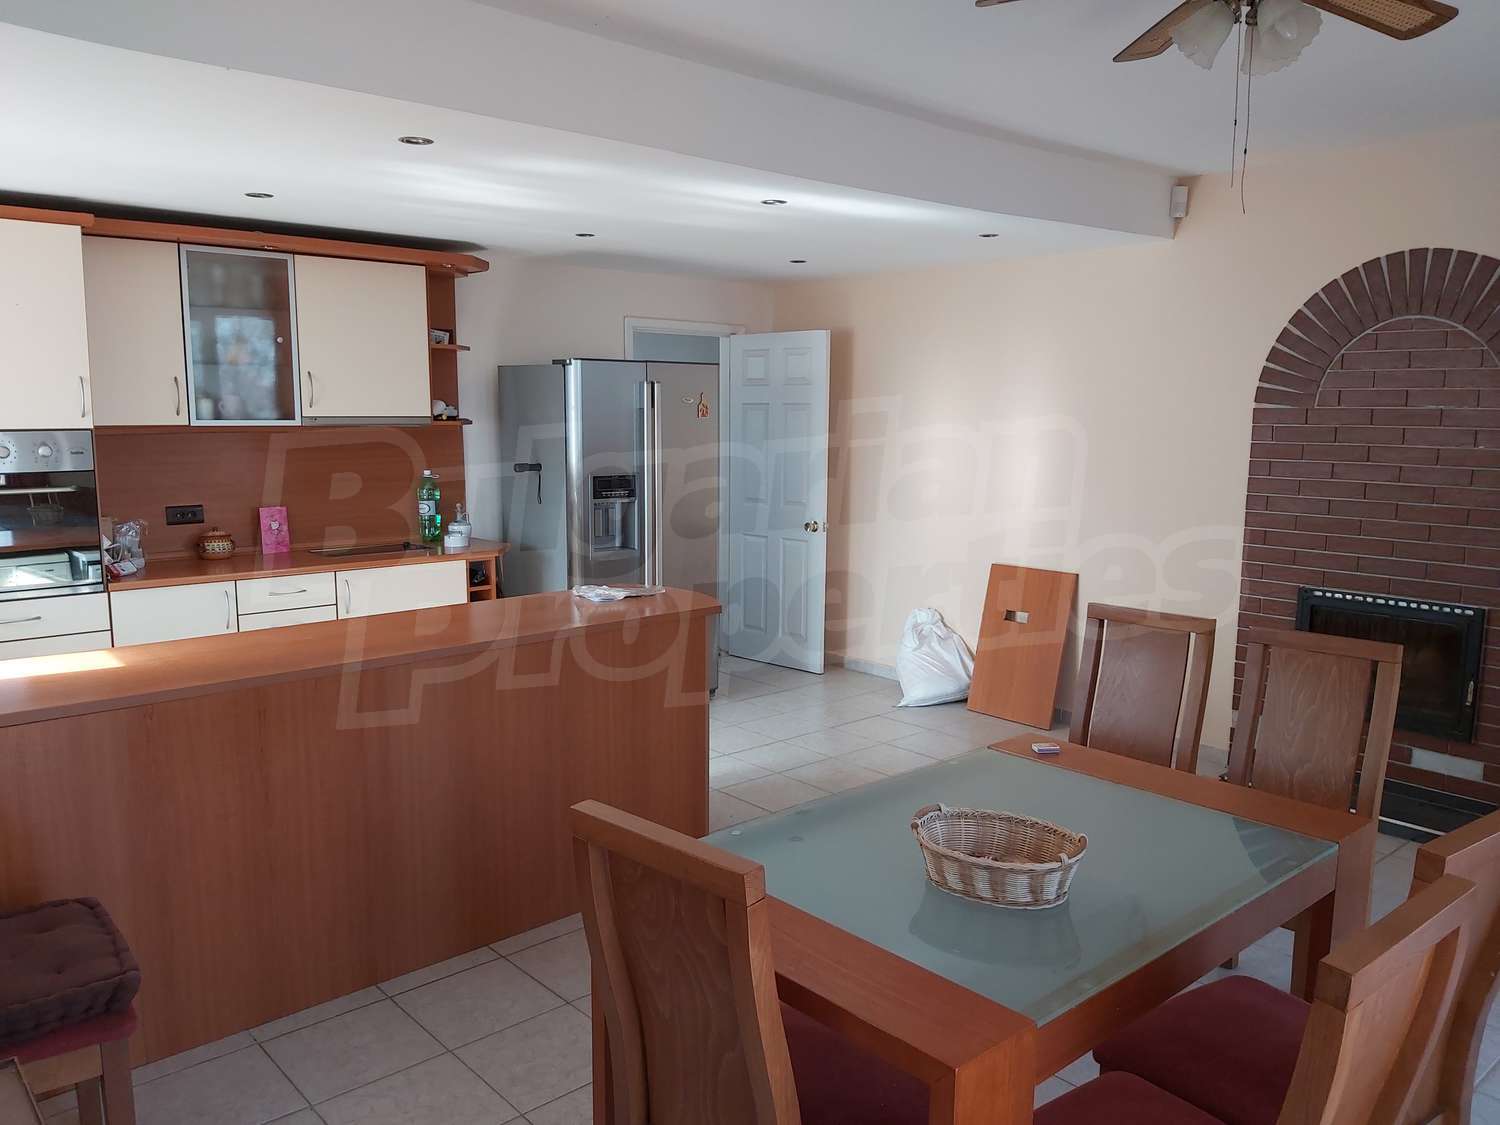 Fully furnished three-storey house in Perchemliata area near the resort Golden Sands